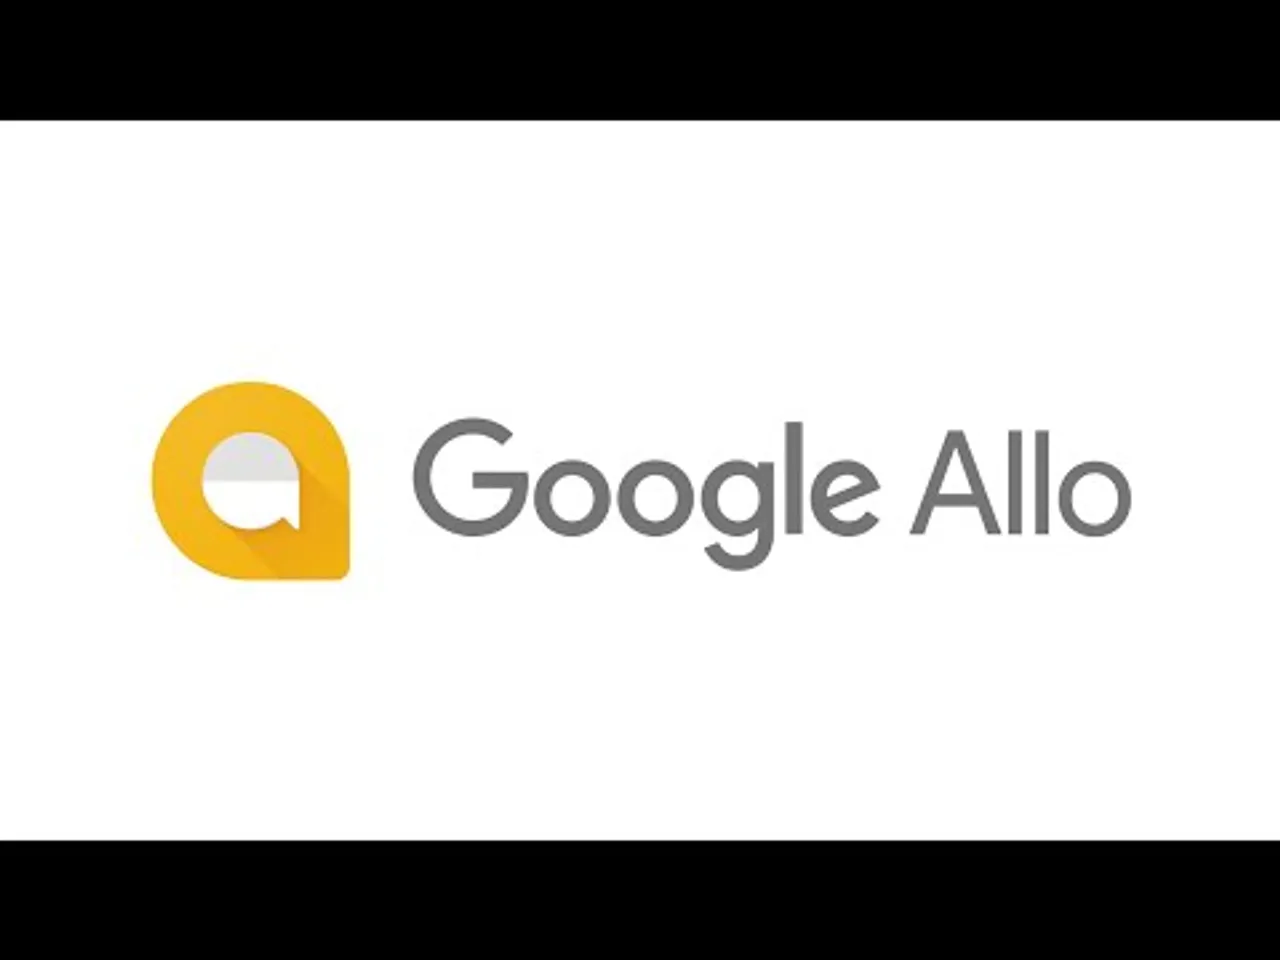 Allo is Google’s new chat app with built-in ‘Assistant’